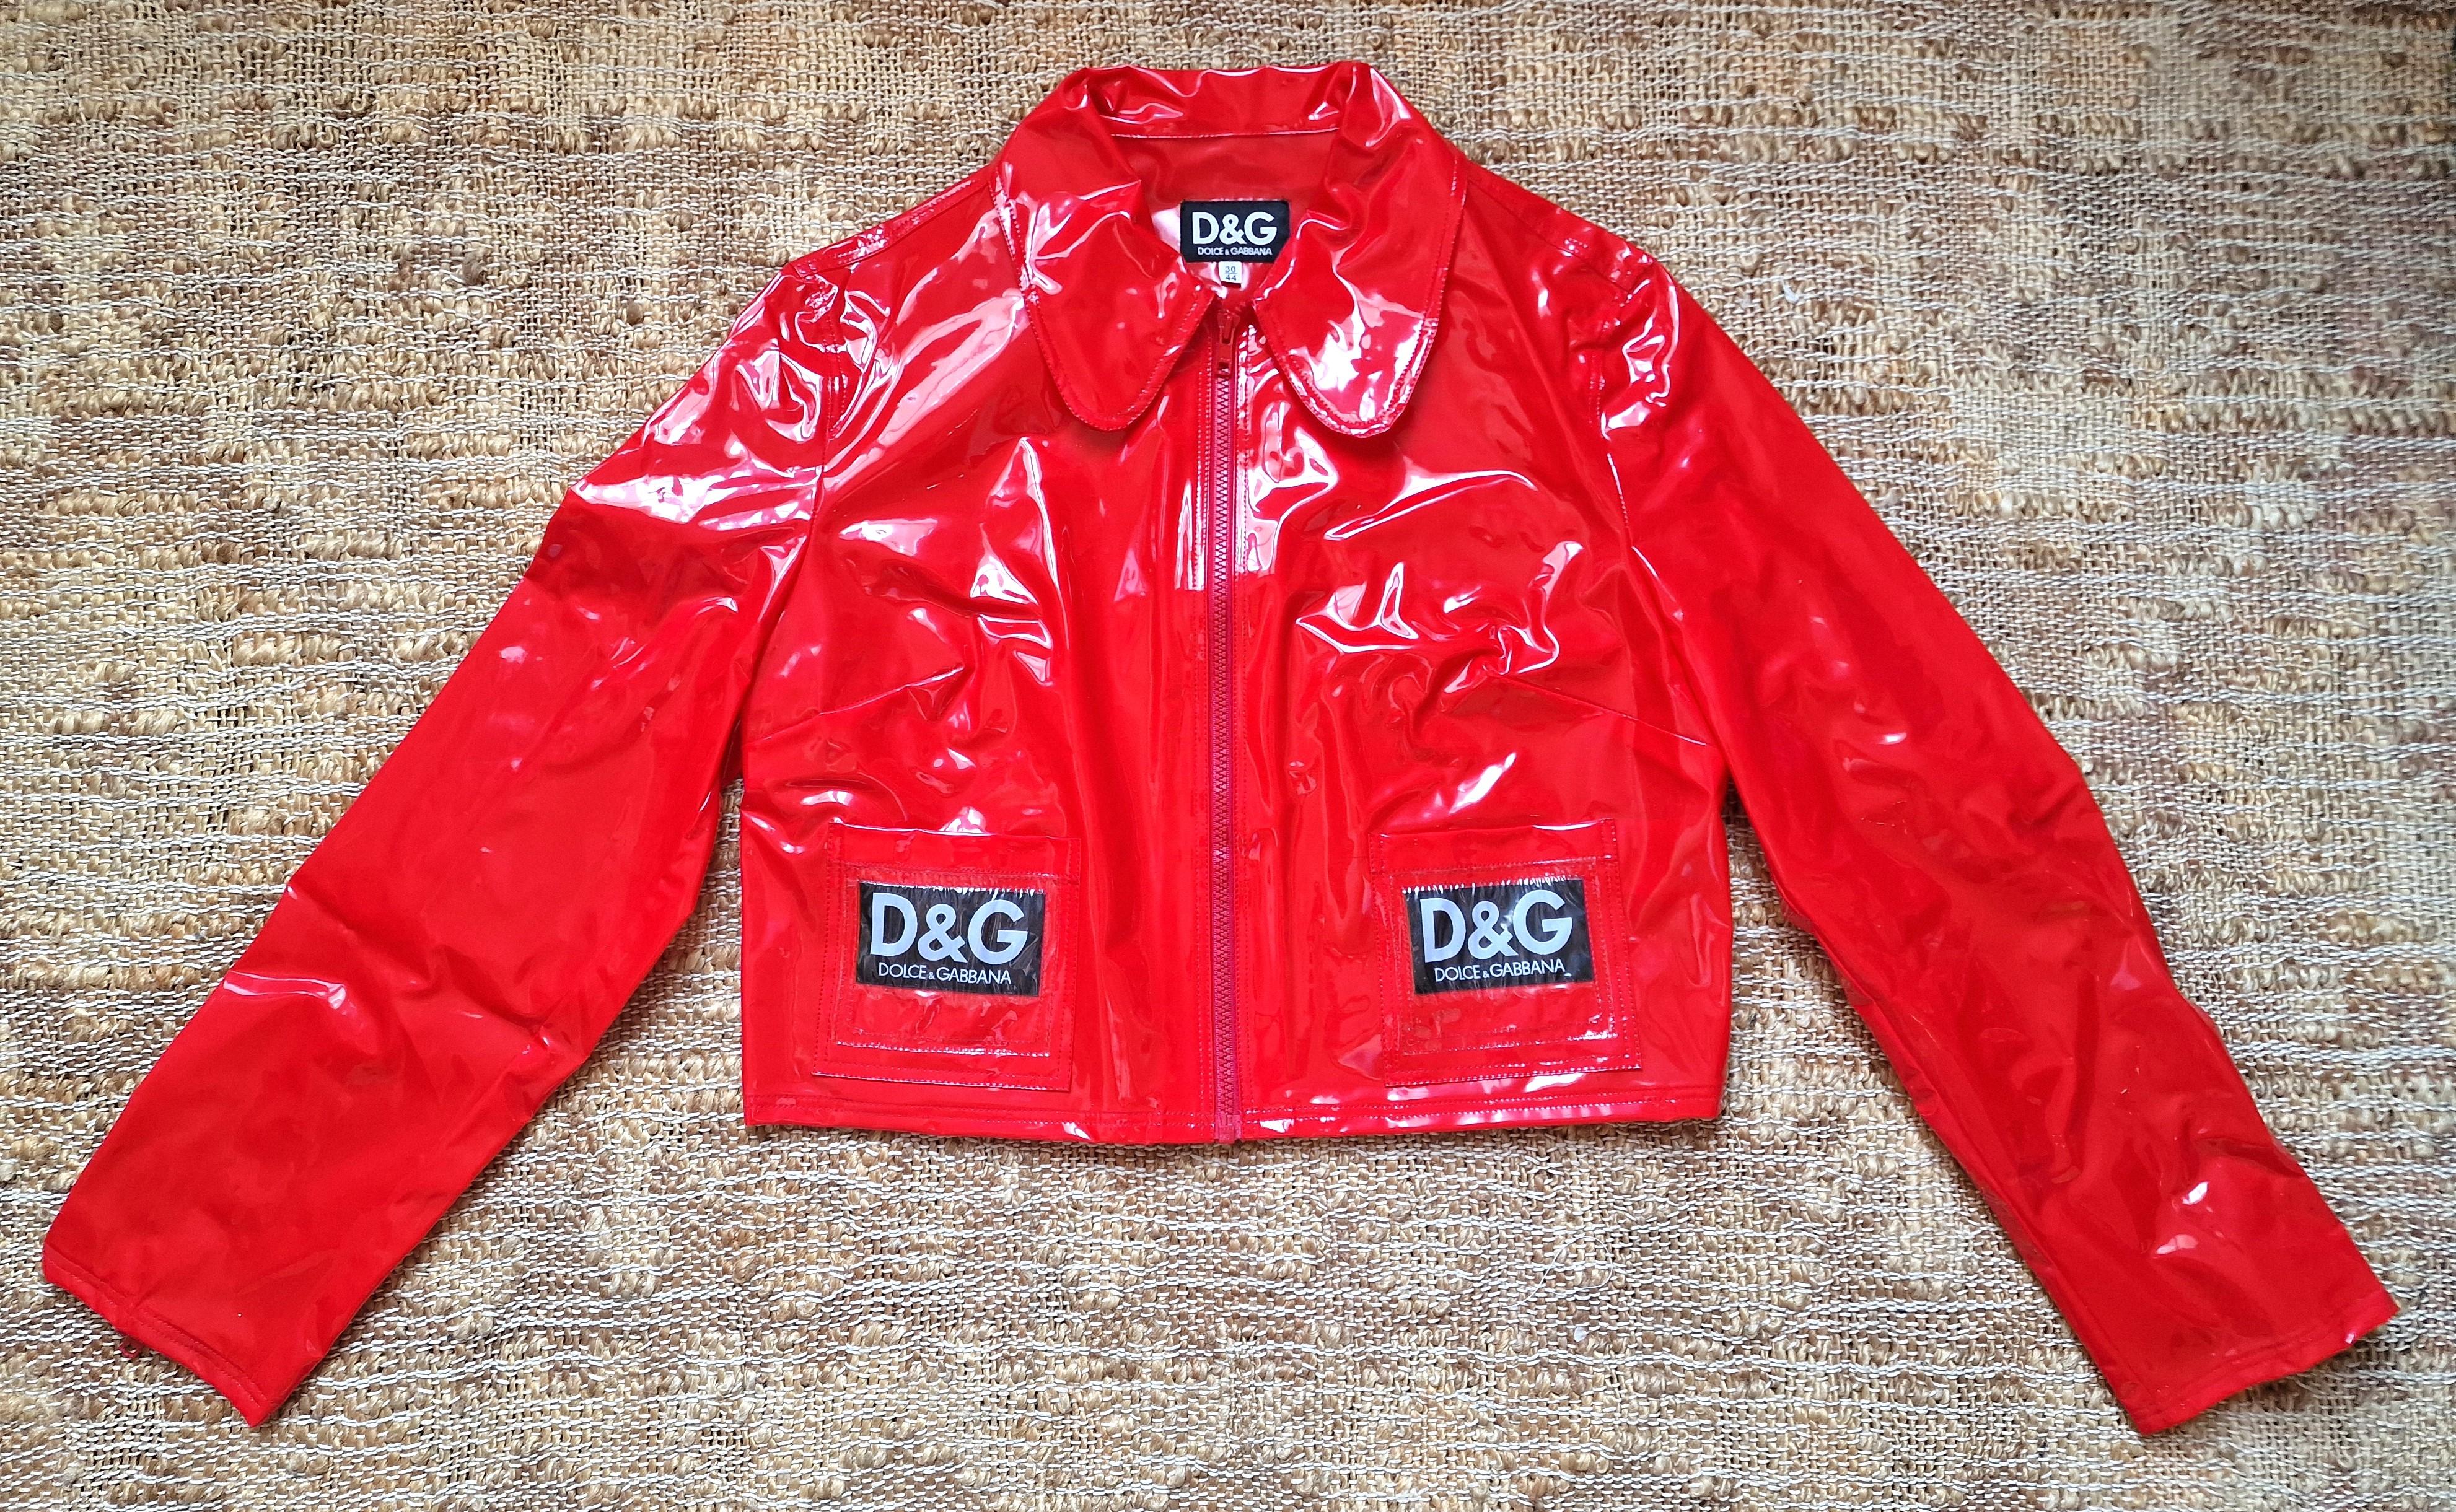 Shiny raincoat by Dolce and Gabbana!

2 front pockets.
Logos on the pockets and on the back.

VERY GOOD condition!

SIZE
Fits from small to medium.
MArked size: 30 / 44.
Length: 46 cm / 18.1 inch
Bust: 50 cm / 19.7 inch
Shoulder to shoulder: 45 cm /